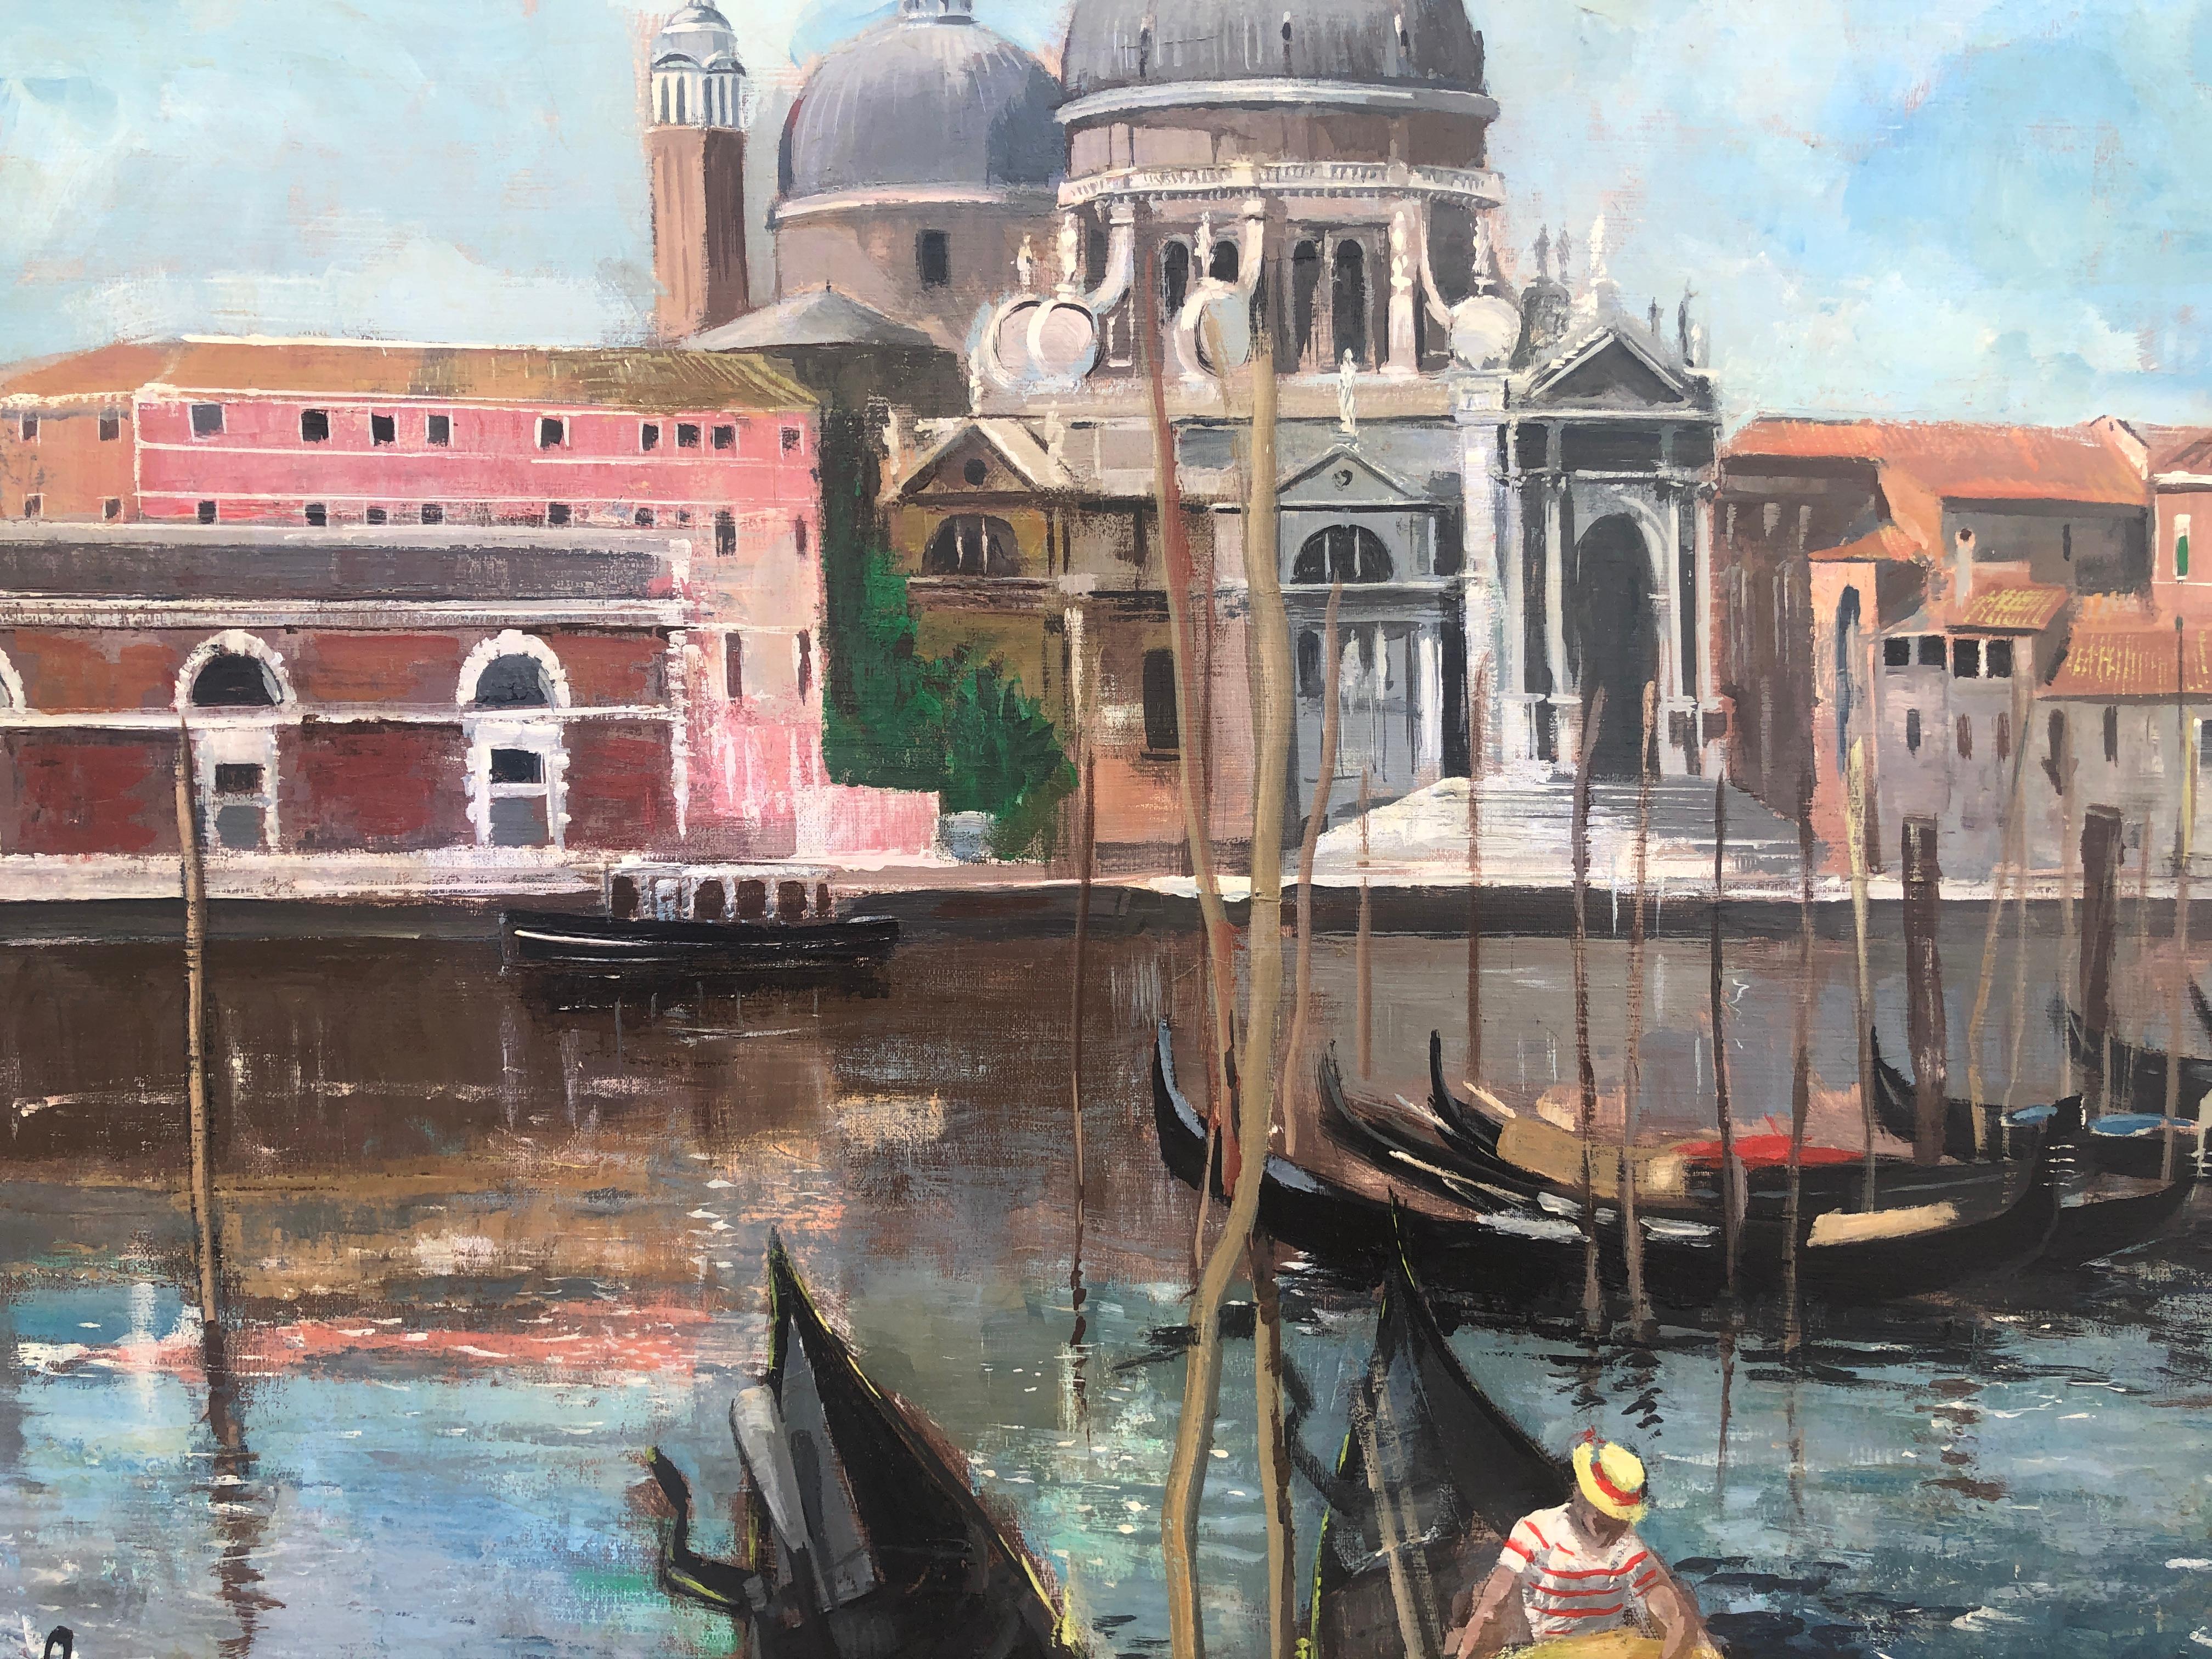 Gondolas in Venice Italy oil on canvas painting - Gray Landscape Painting by Jose Luis Florit Rodero